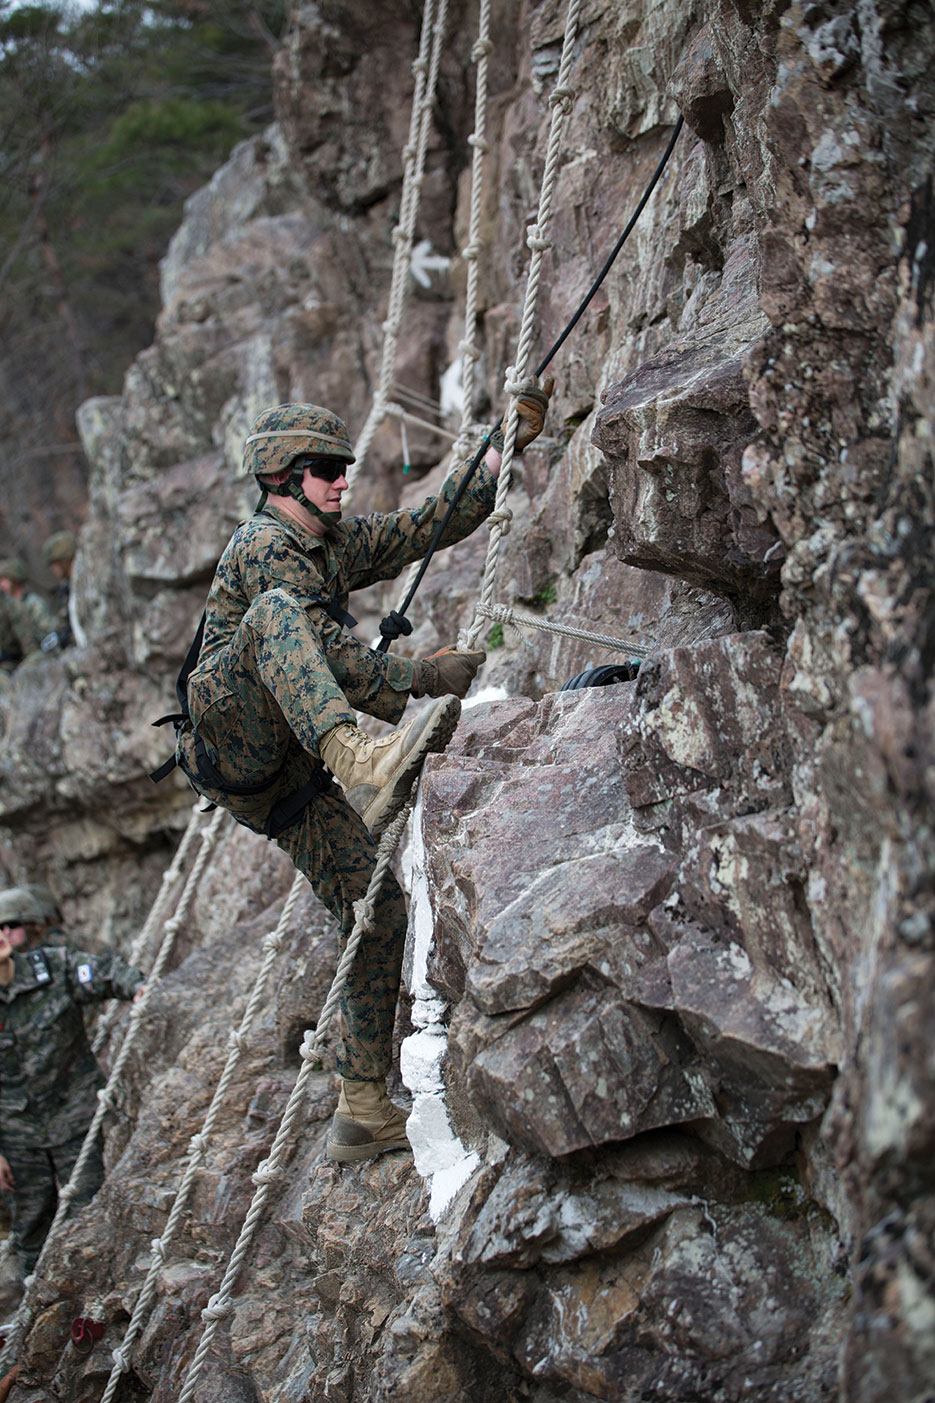 U.S. Marine Corps field radio operator climbs mountainside during mountain warfare training course as part of Marine Expeditionary Force Exercise MEFEX 2014 in Pohang, South Korea (DOD/Cedric R. Haller II)